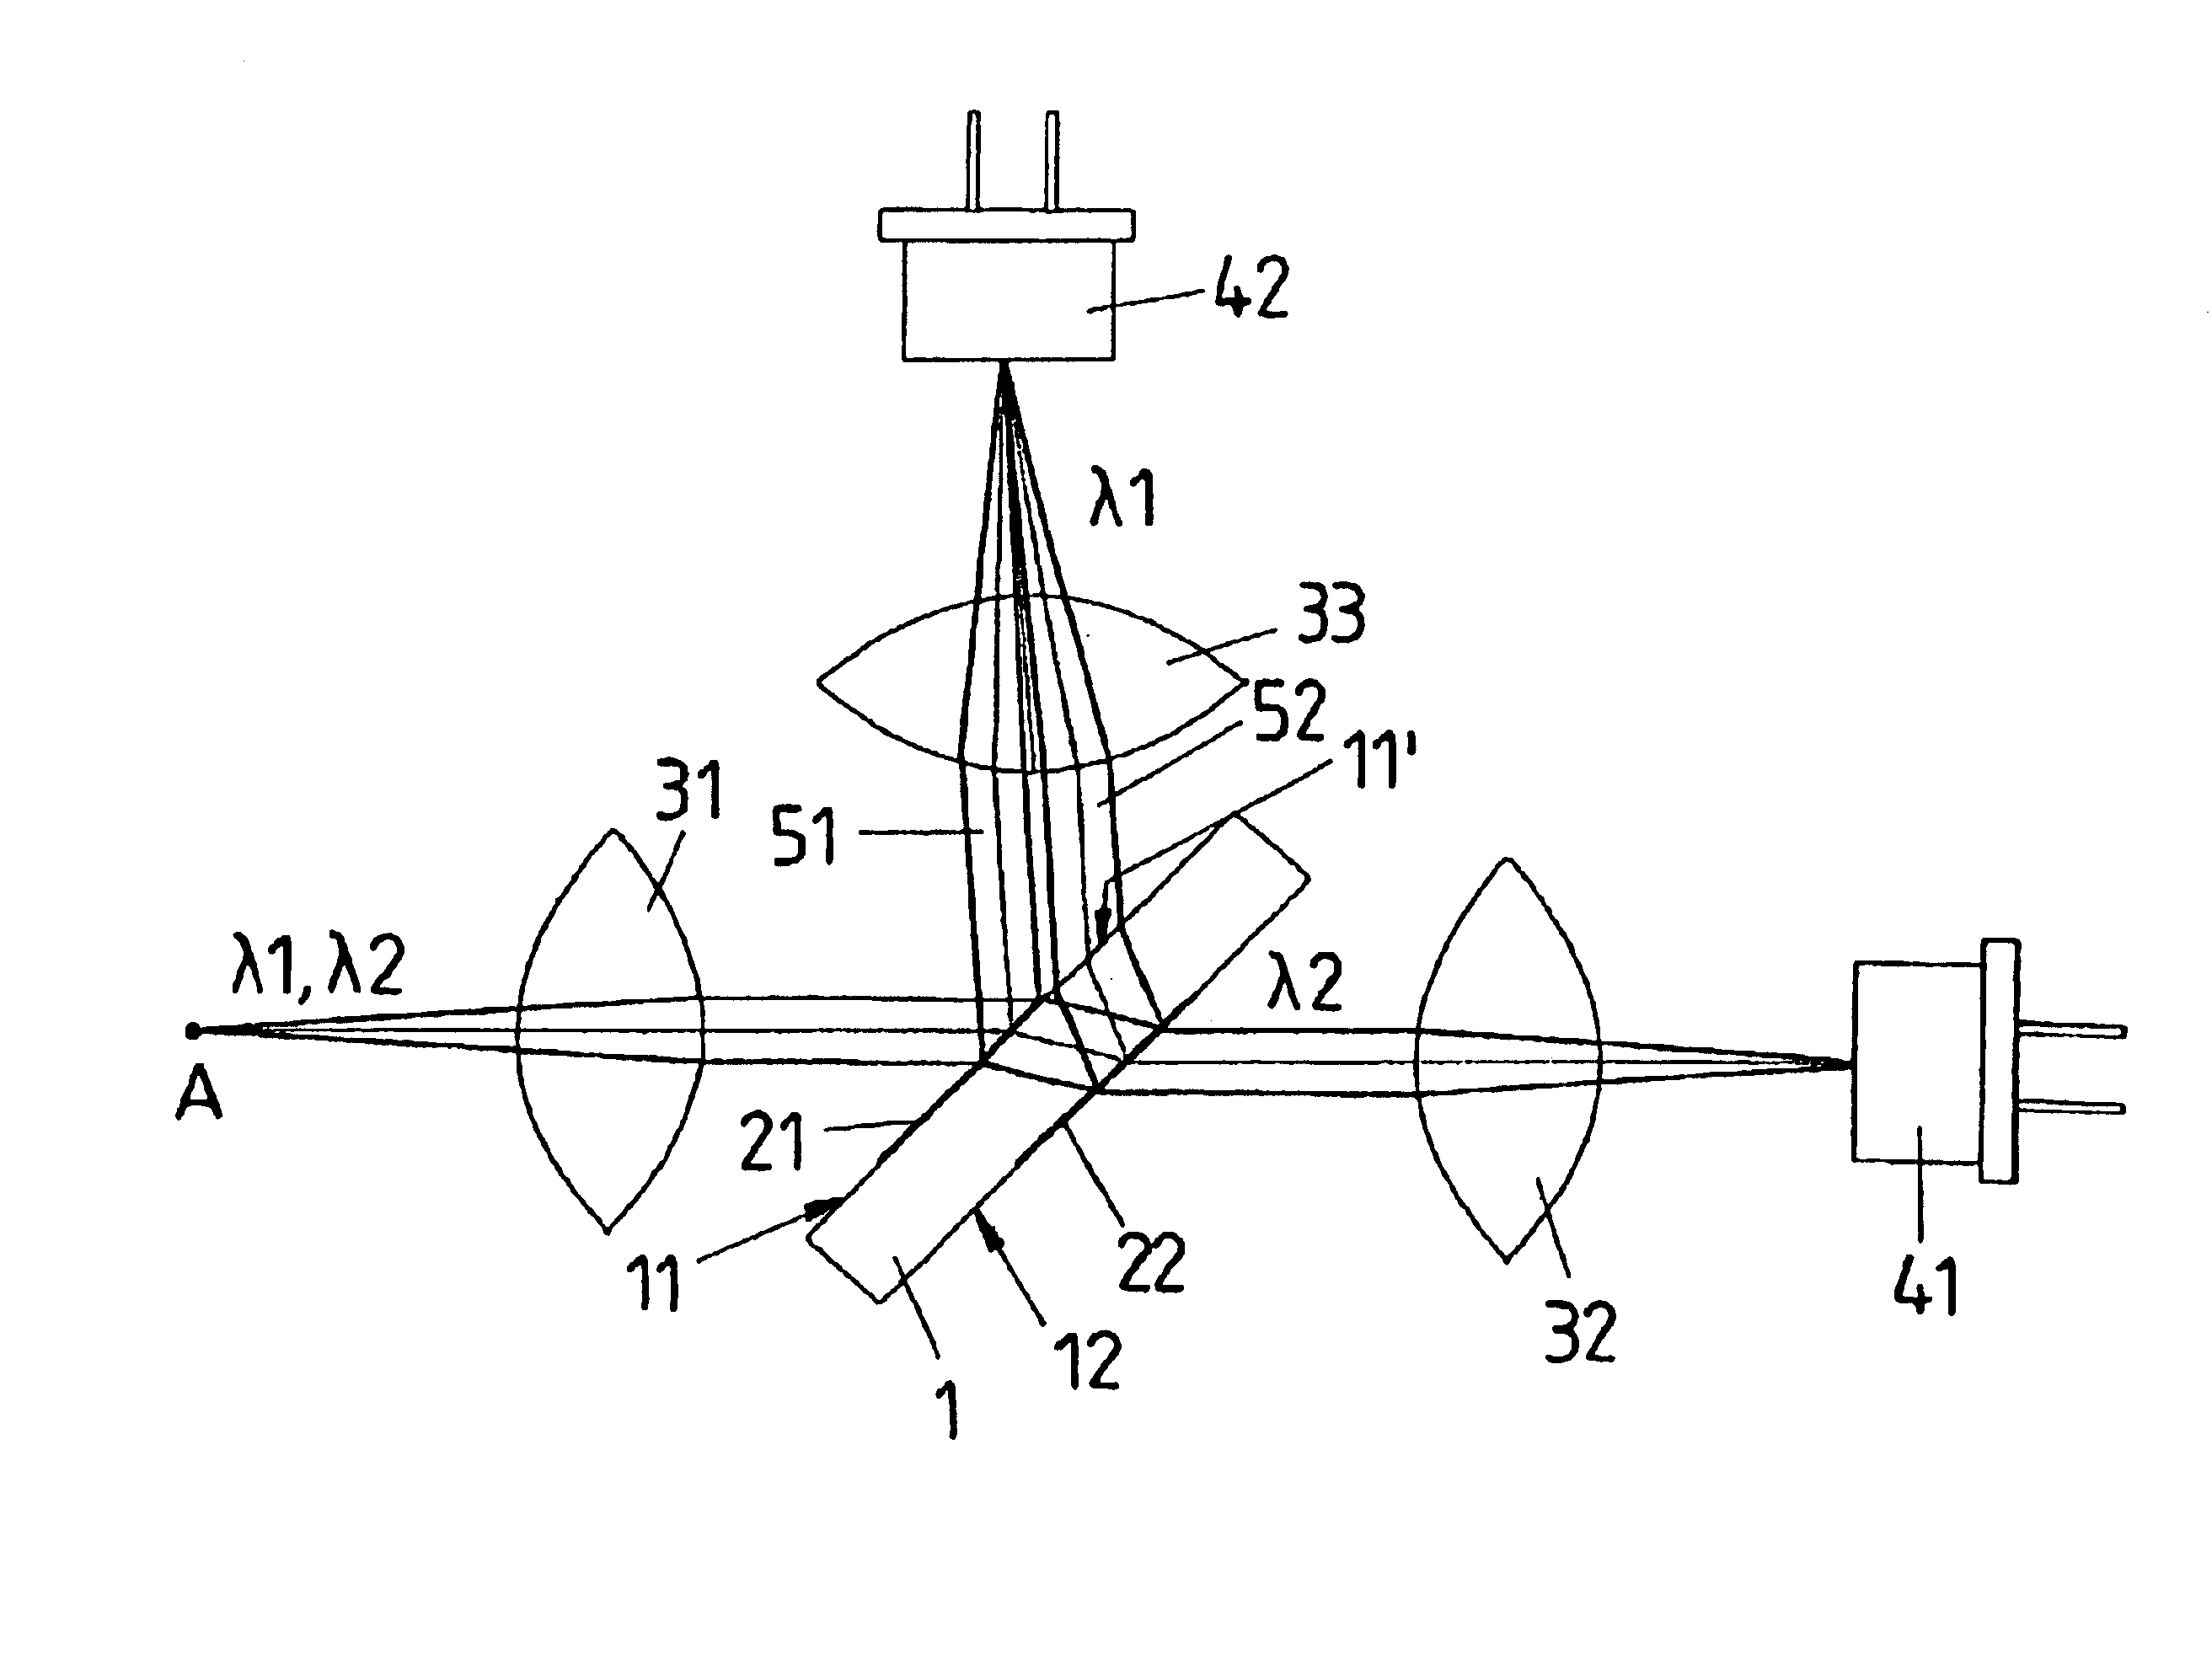 Apparatus for demultiplexing optical signals at a large number of wavelengths